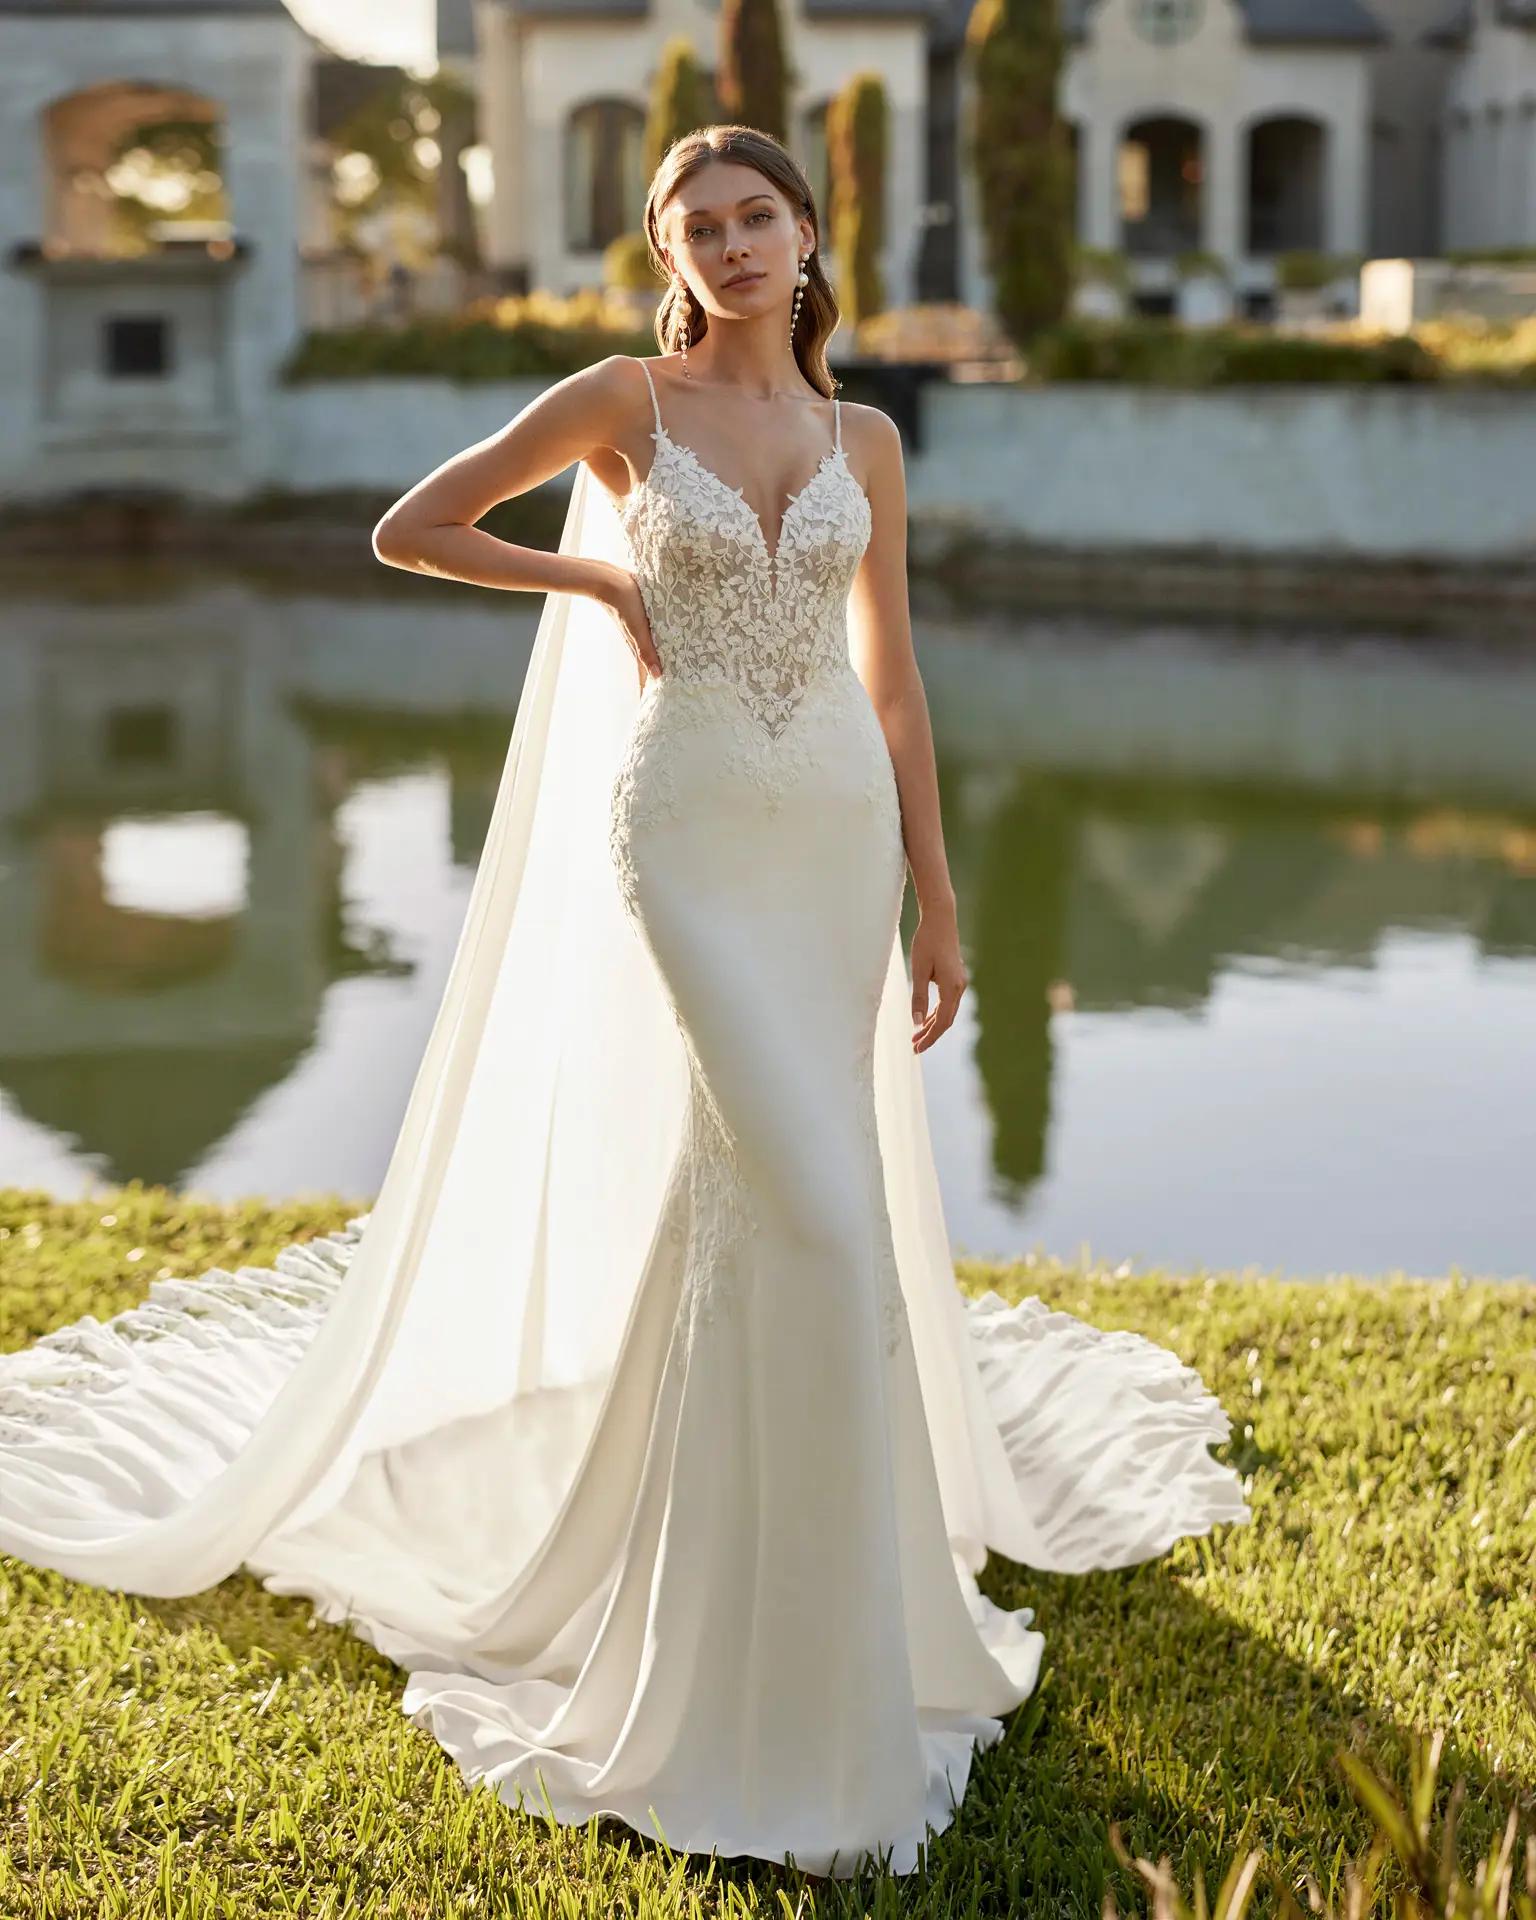 Elita wedding dress by Rosa Clara with detailed plunging neckline bodice spaghetti straps and long detailed train with a cape